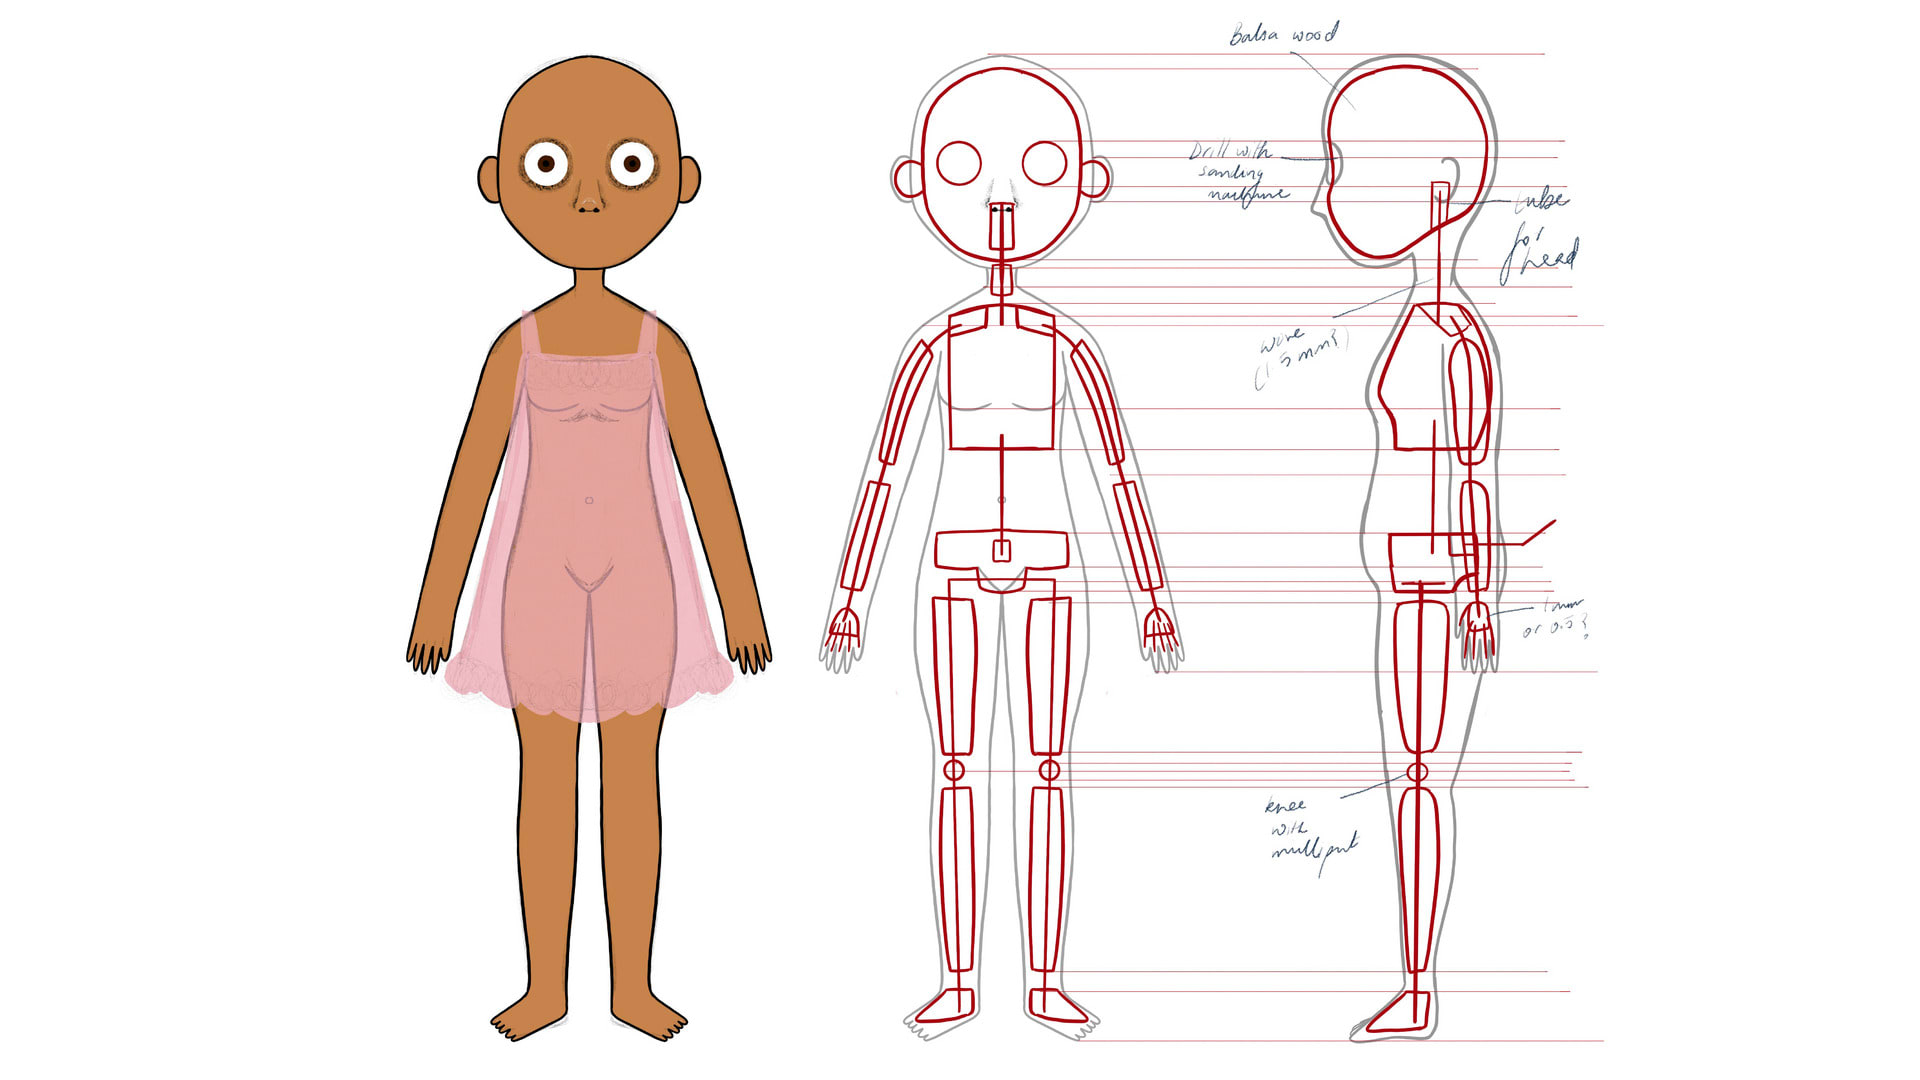 Initial character design with armature structure